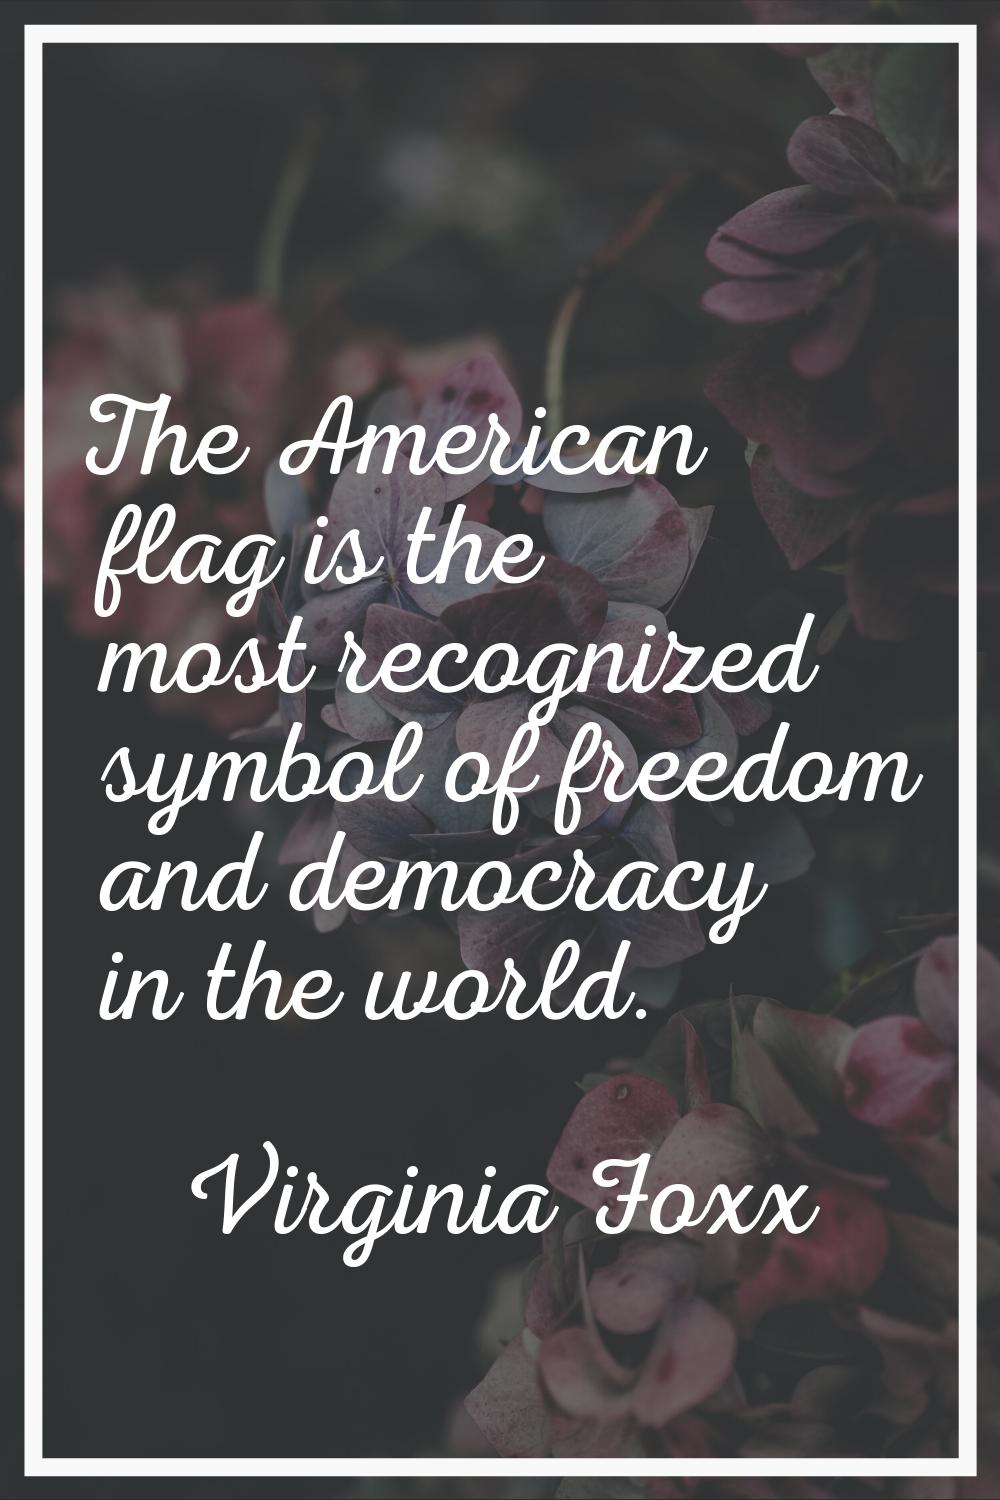 The American flag is the most recognized symbol of freedom and democracy in the world.